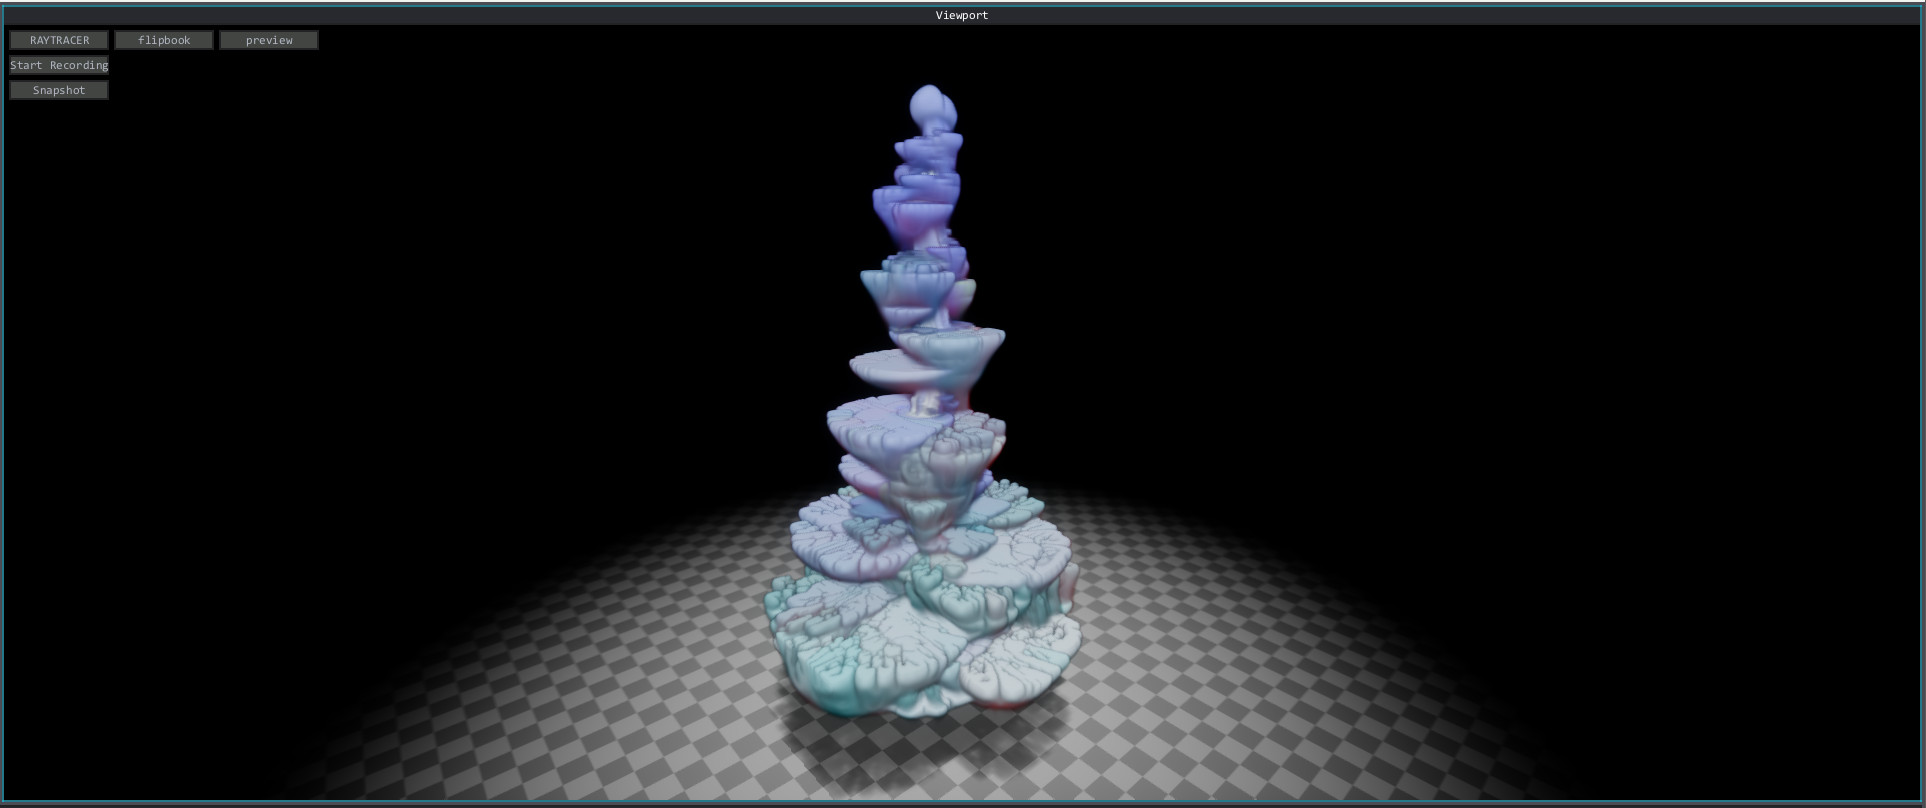 Strange coral. It's interesting how you can wrangle all kinds of parameters to get exotic results.